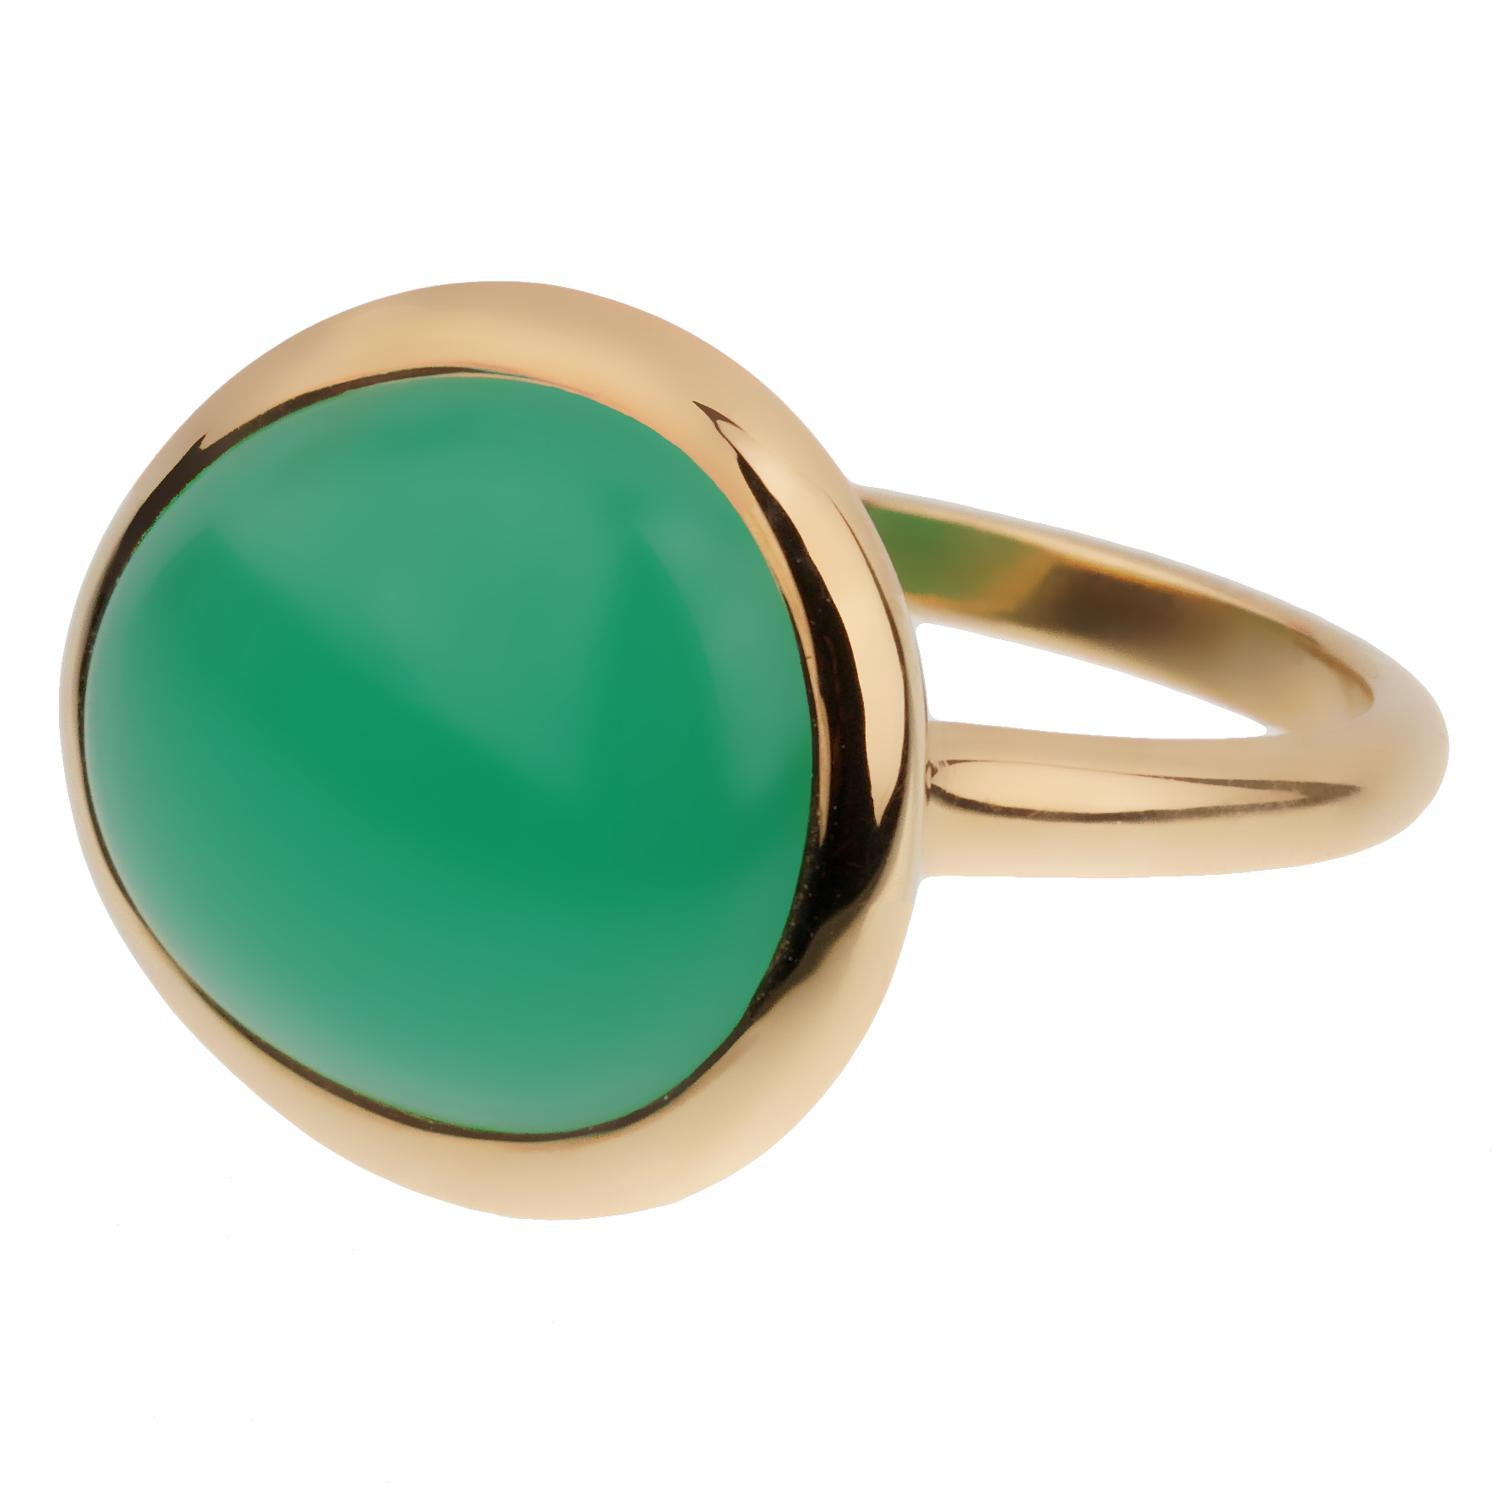 A chic Fred of Paris yellow gold cocktail ring showcasing a 7ct cabochon Chrysophase set in 18k gold. The ring measures a size 5 3/4 and can be resized if needed.